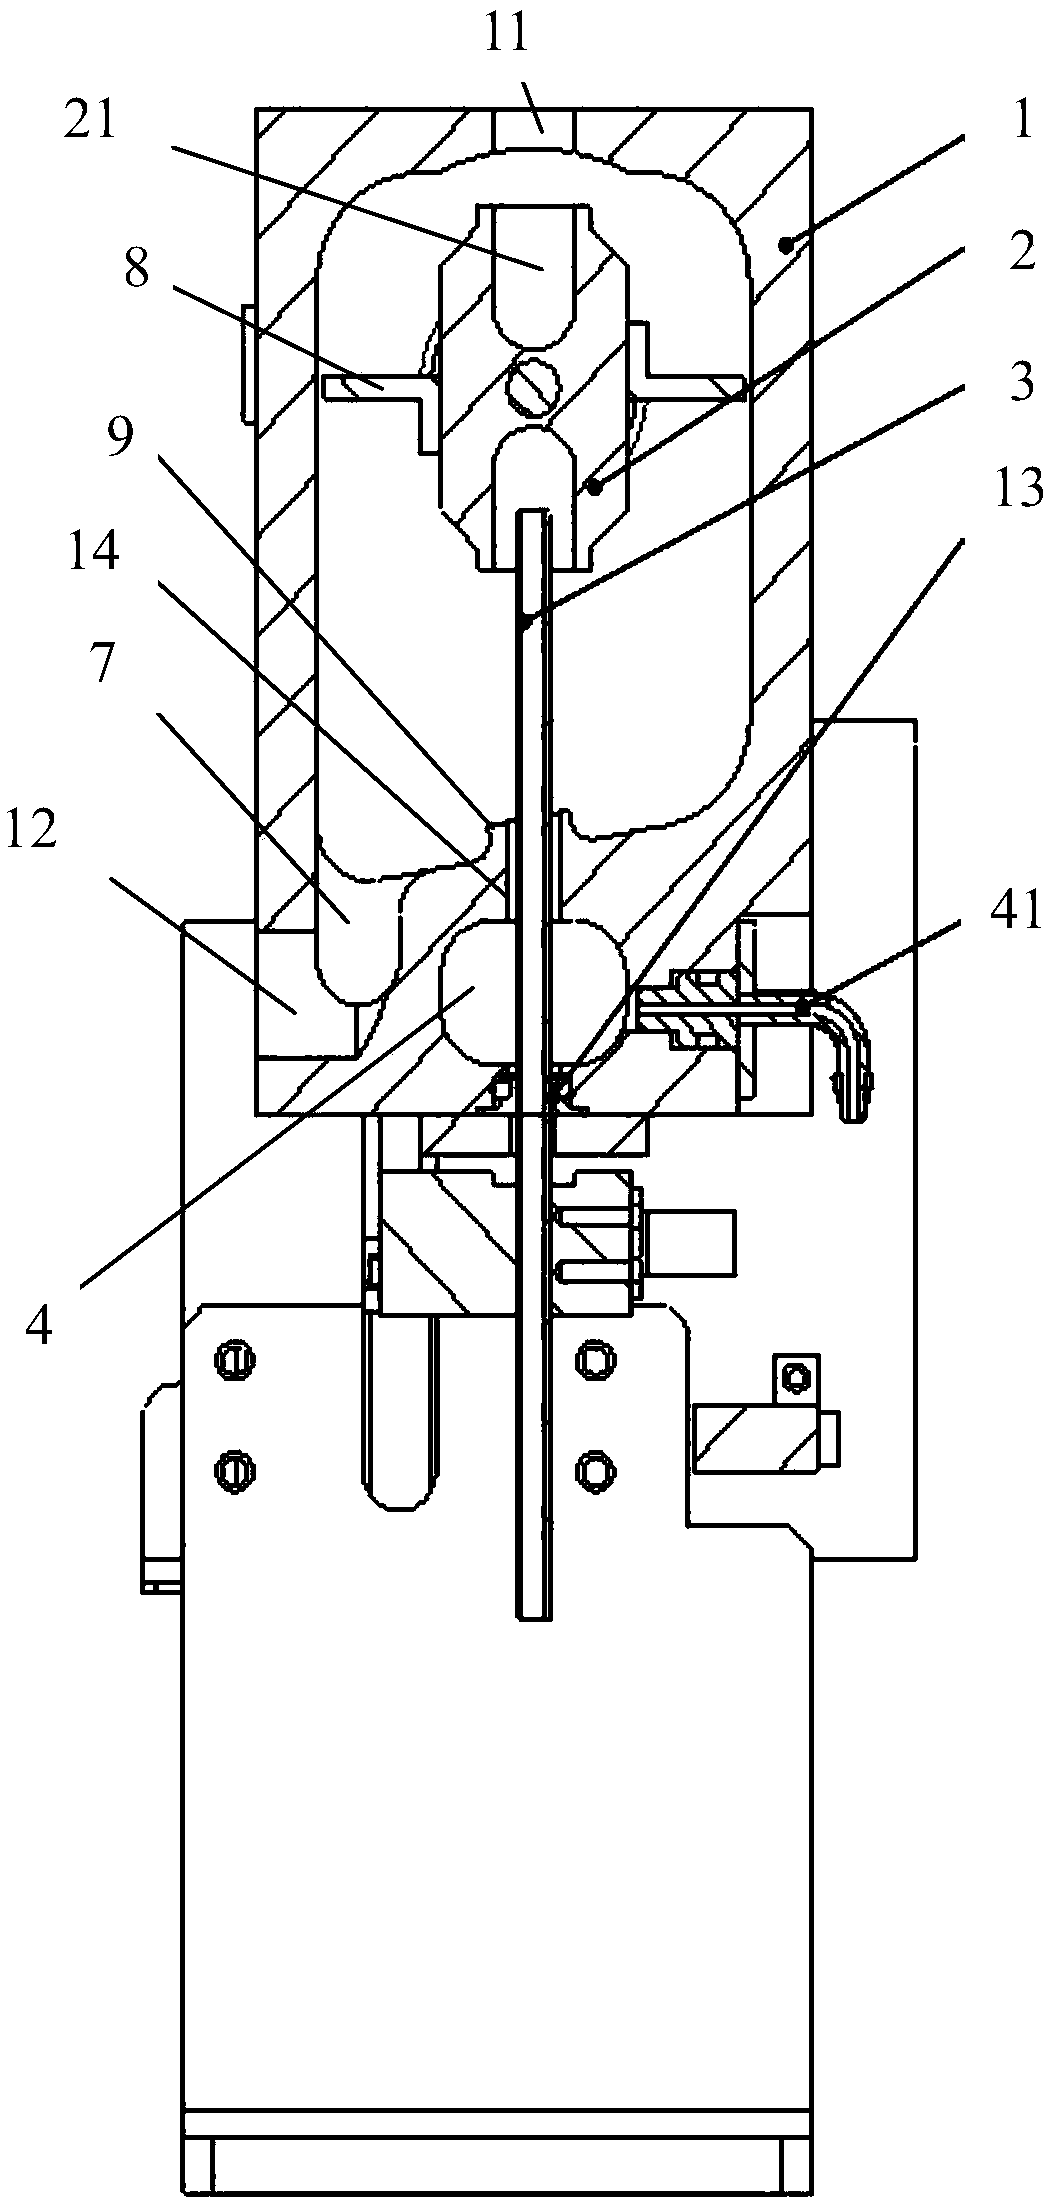 Double-cavity diluting apparatus